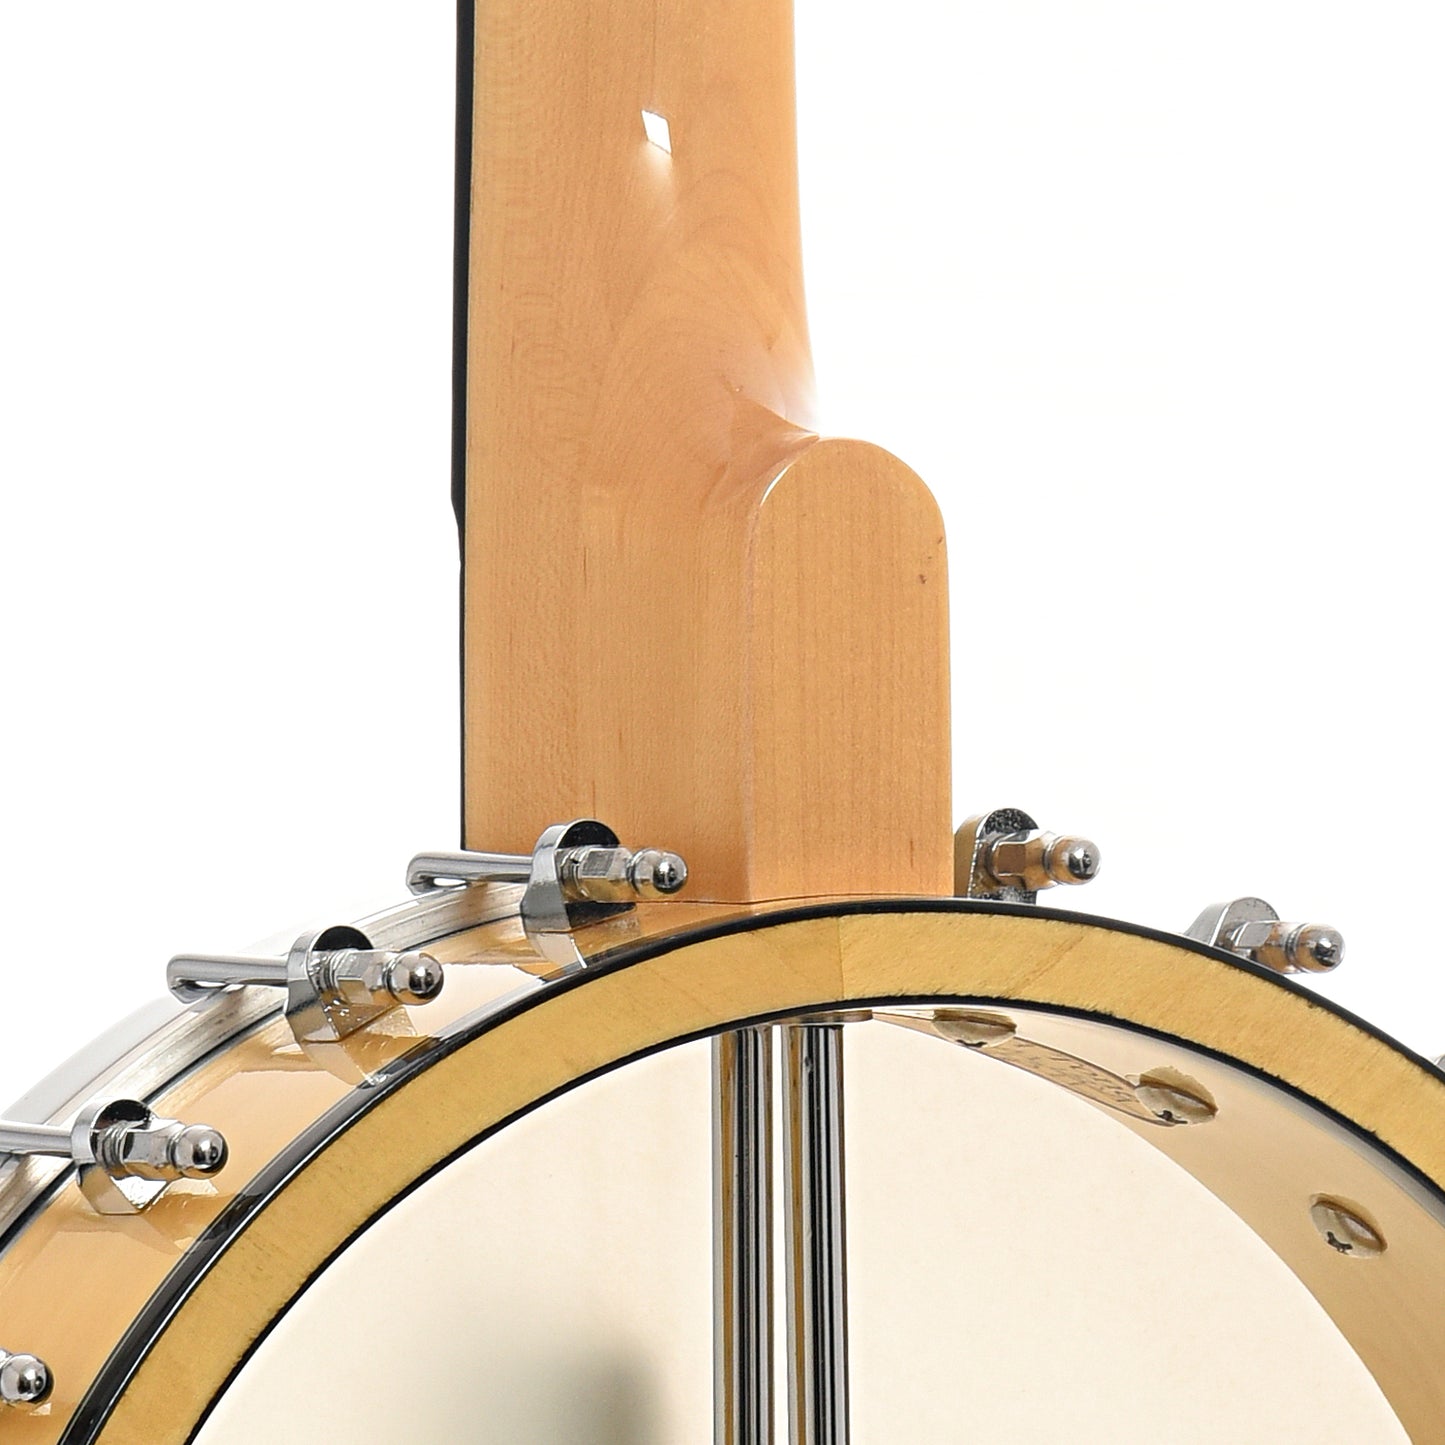 Neck joint of Gold Tone MM-150A Maple Mountain A-Scale (2013)